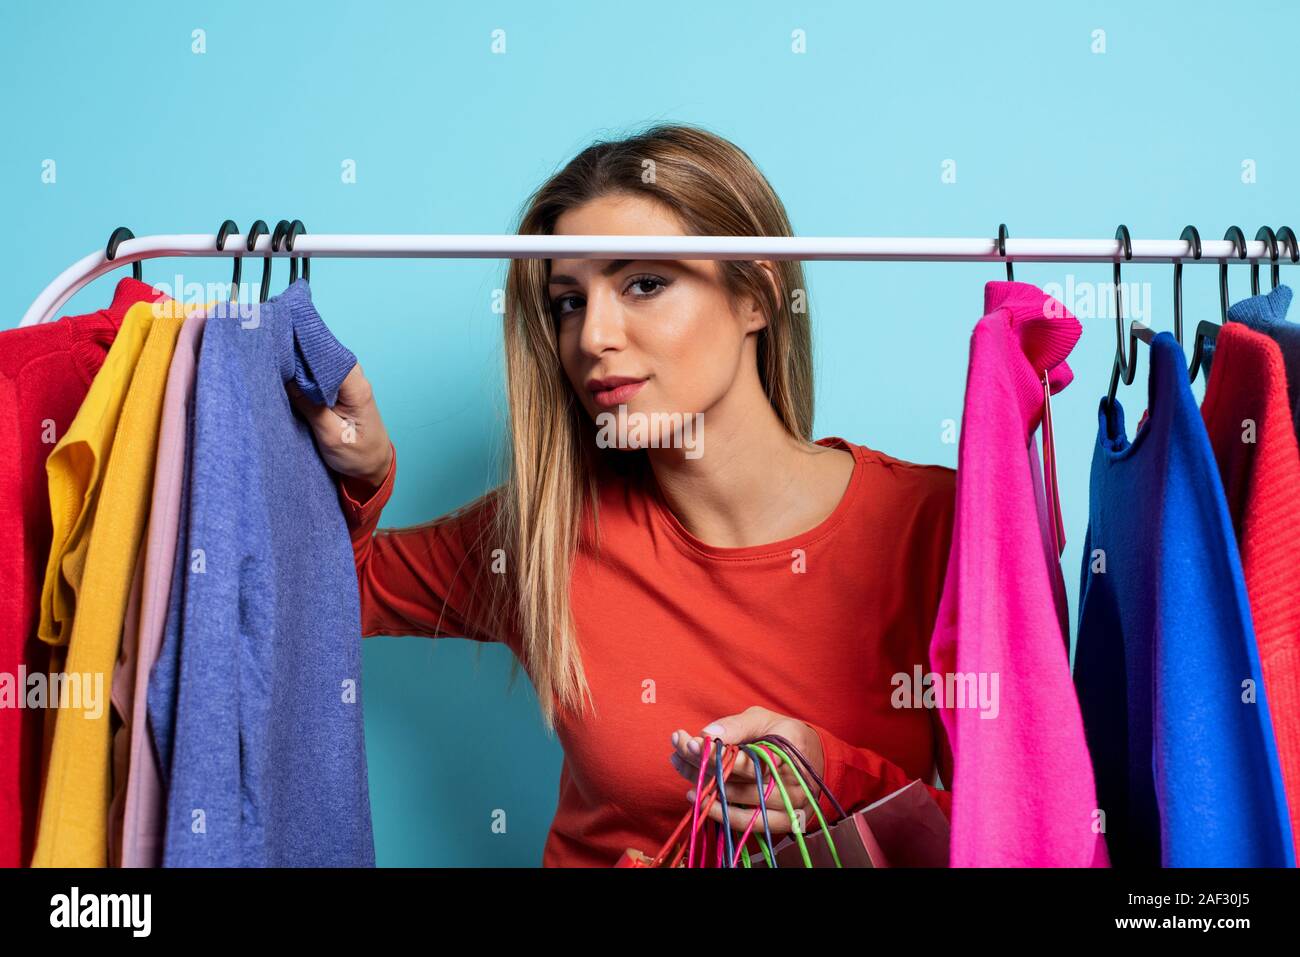 Blonde girl chooses the clothes to buy in a store. Concept of shopping and shopaholic Stock Photo